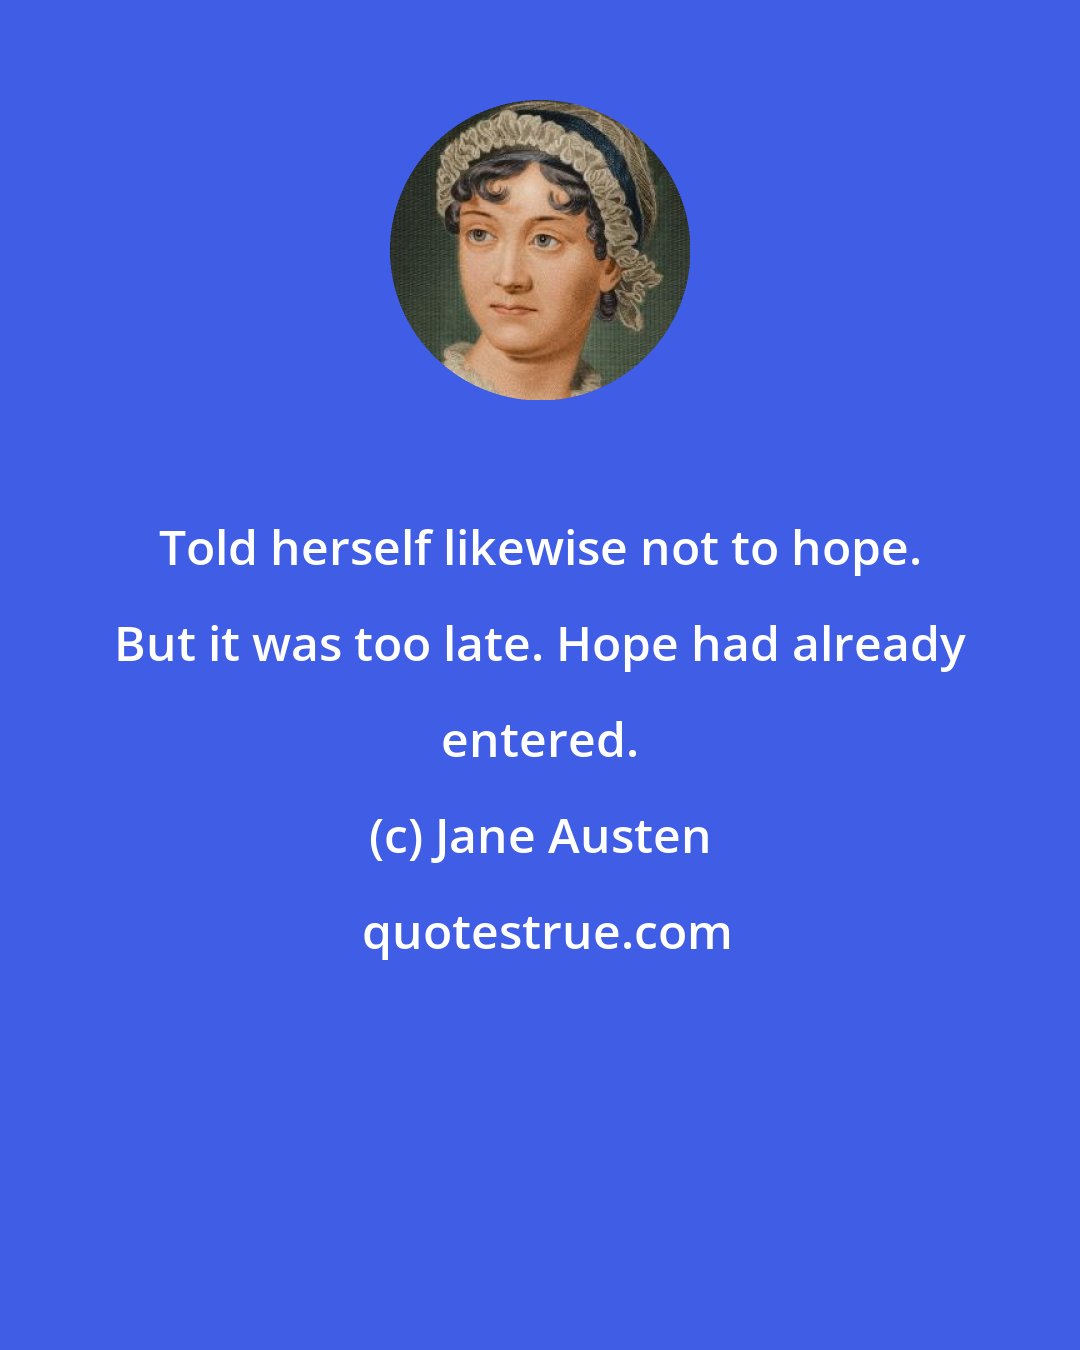 Jane Austen: Told herself likewise not to hope. But it was too late. Hope had already entered.